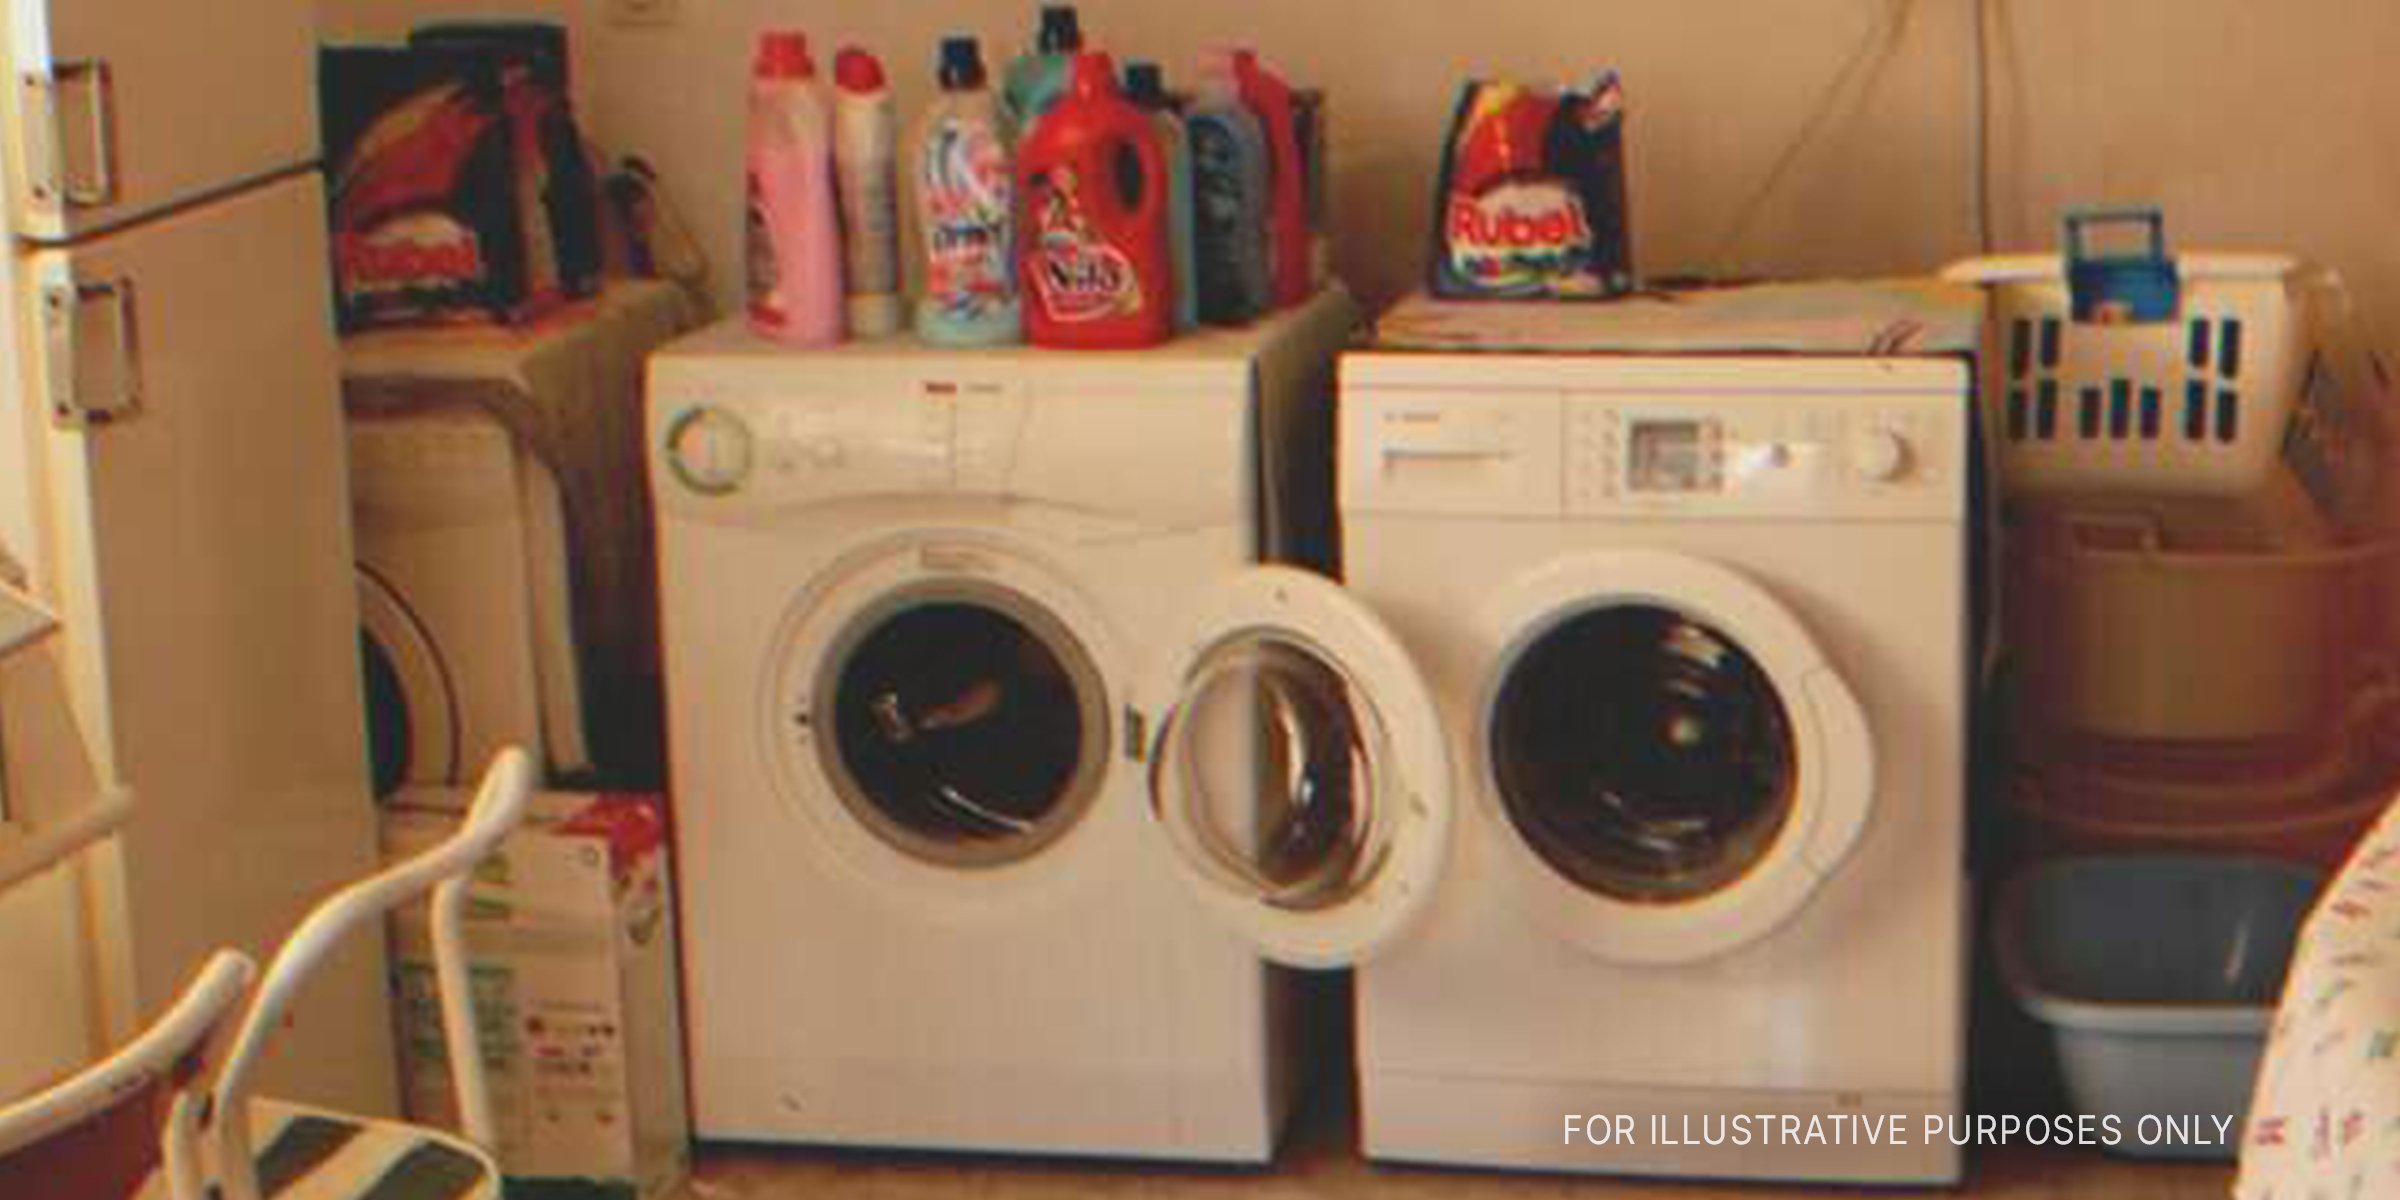 Washing machines with bottles of detergents placed on top of them. | Source: Flickr / auxesis (CC BY 2.0)